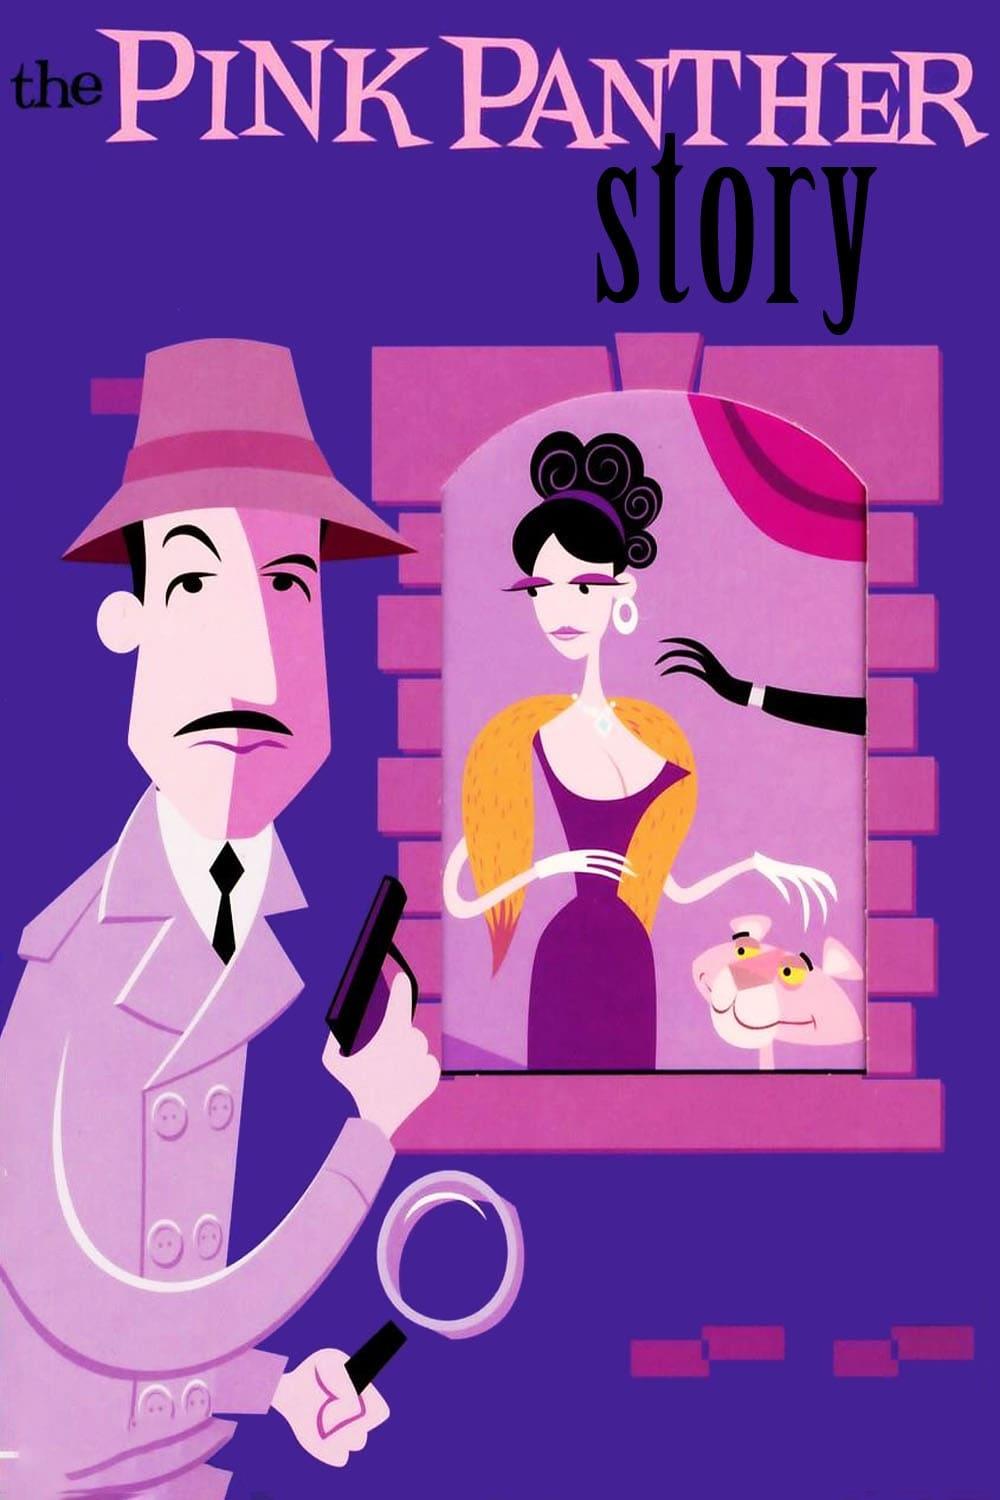 The Pink Panther Story poster